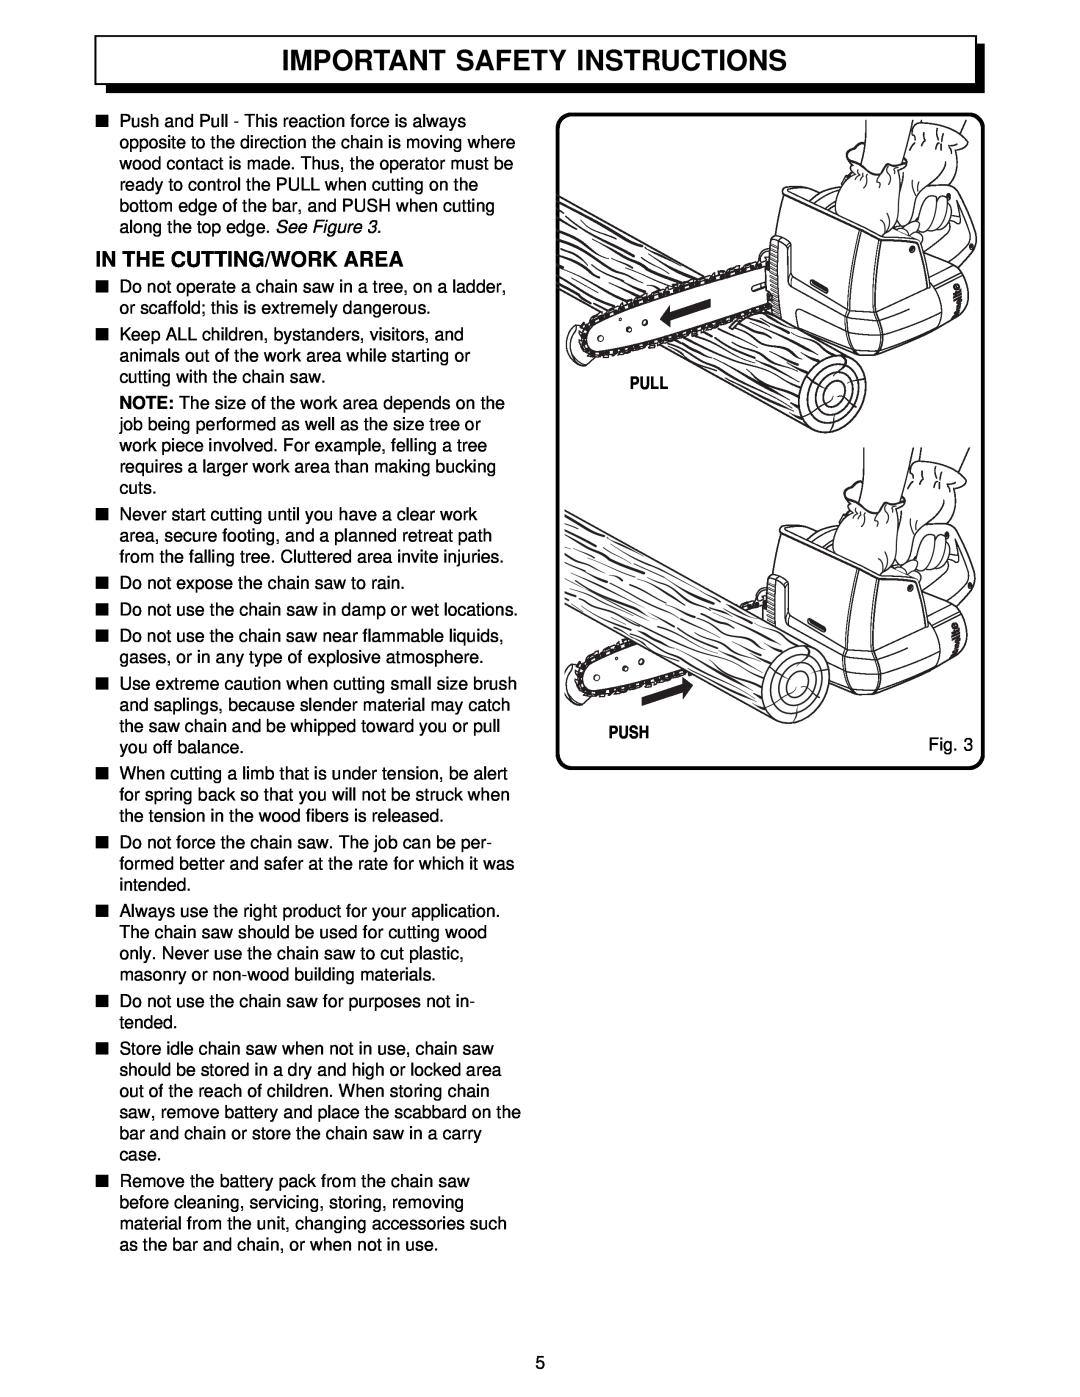 Homelite UT34010 manual In The Cutting/Work Area, Pull, Push, Important Safety Instructions 